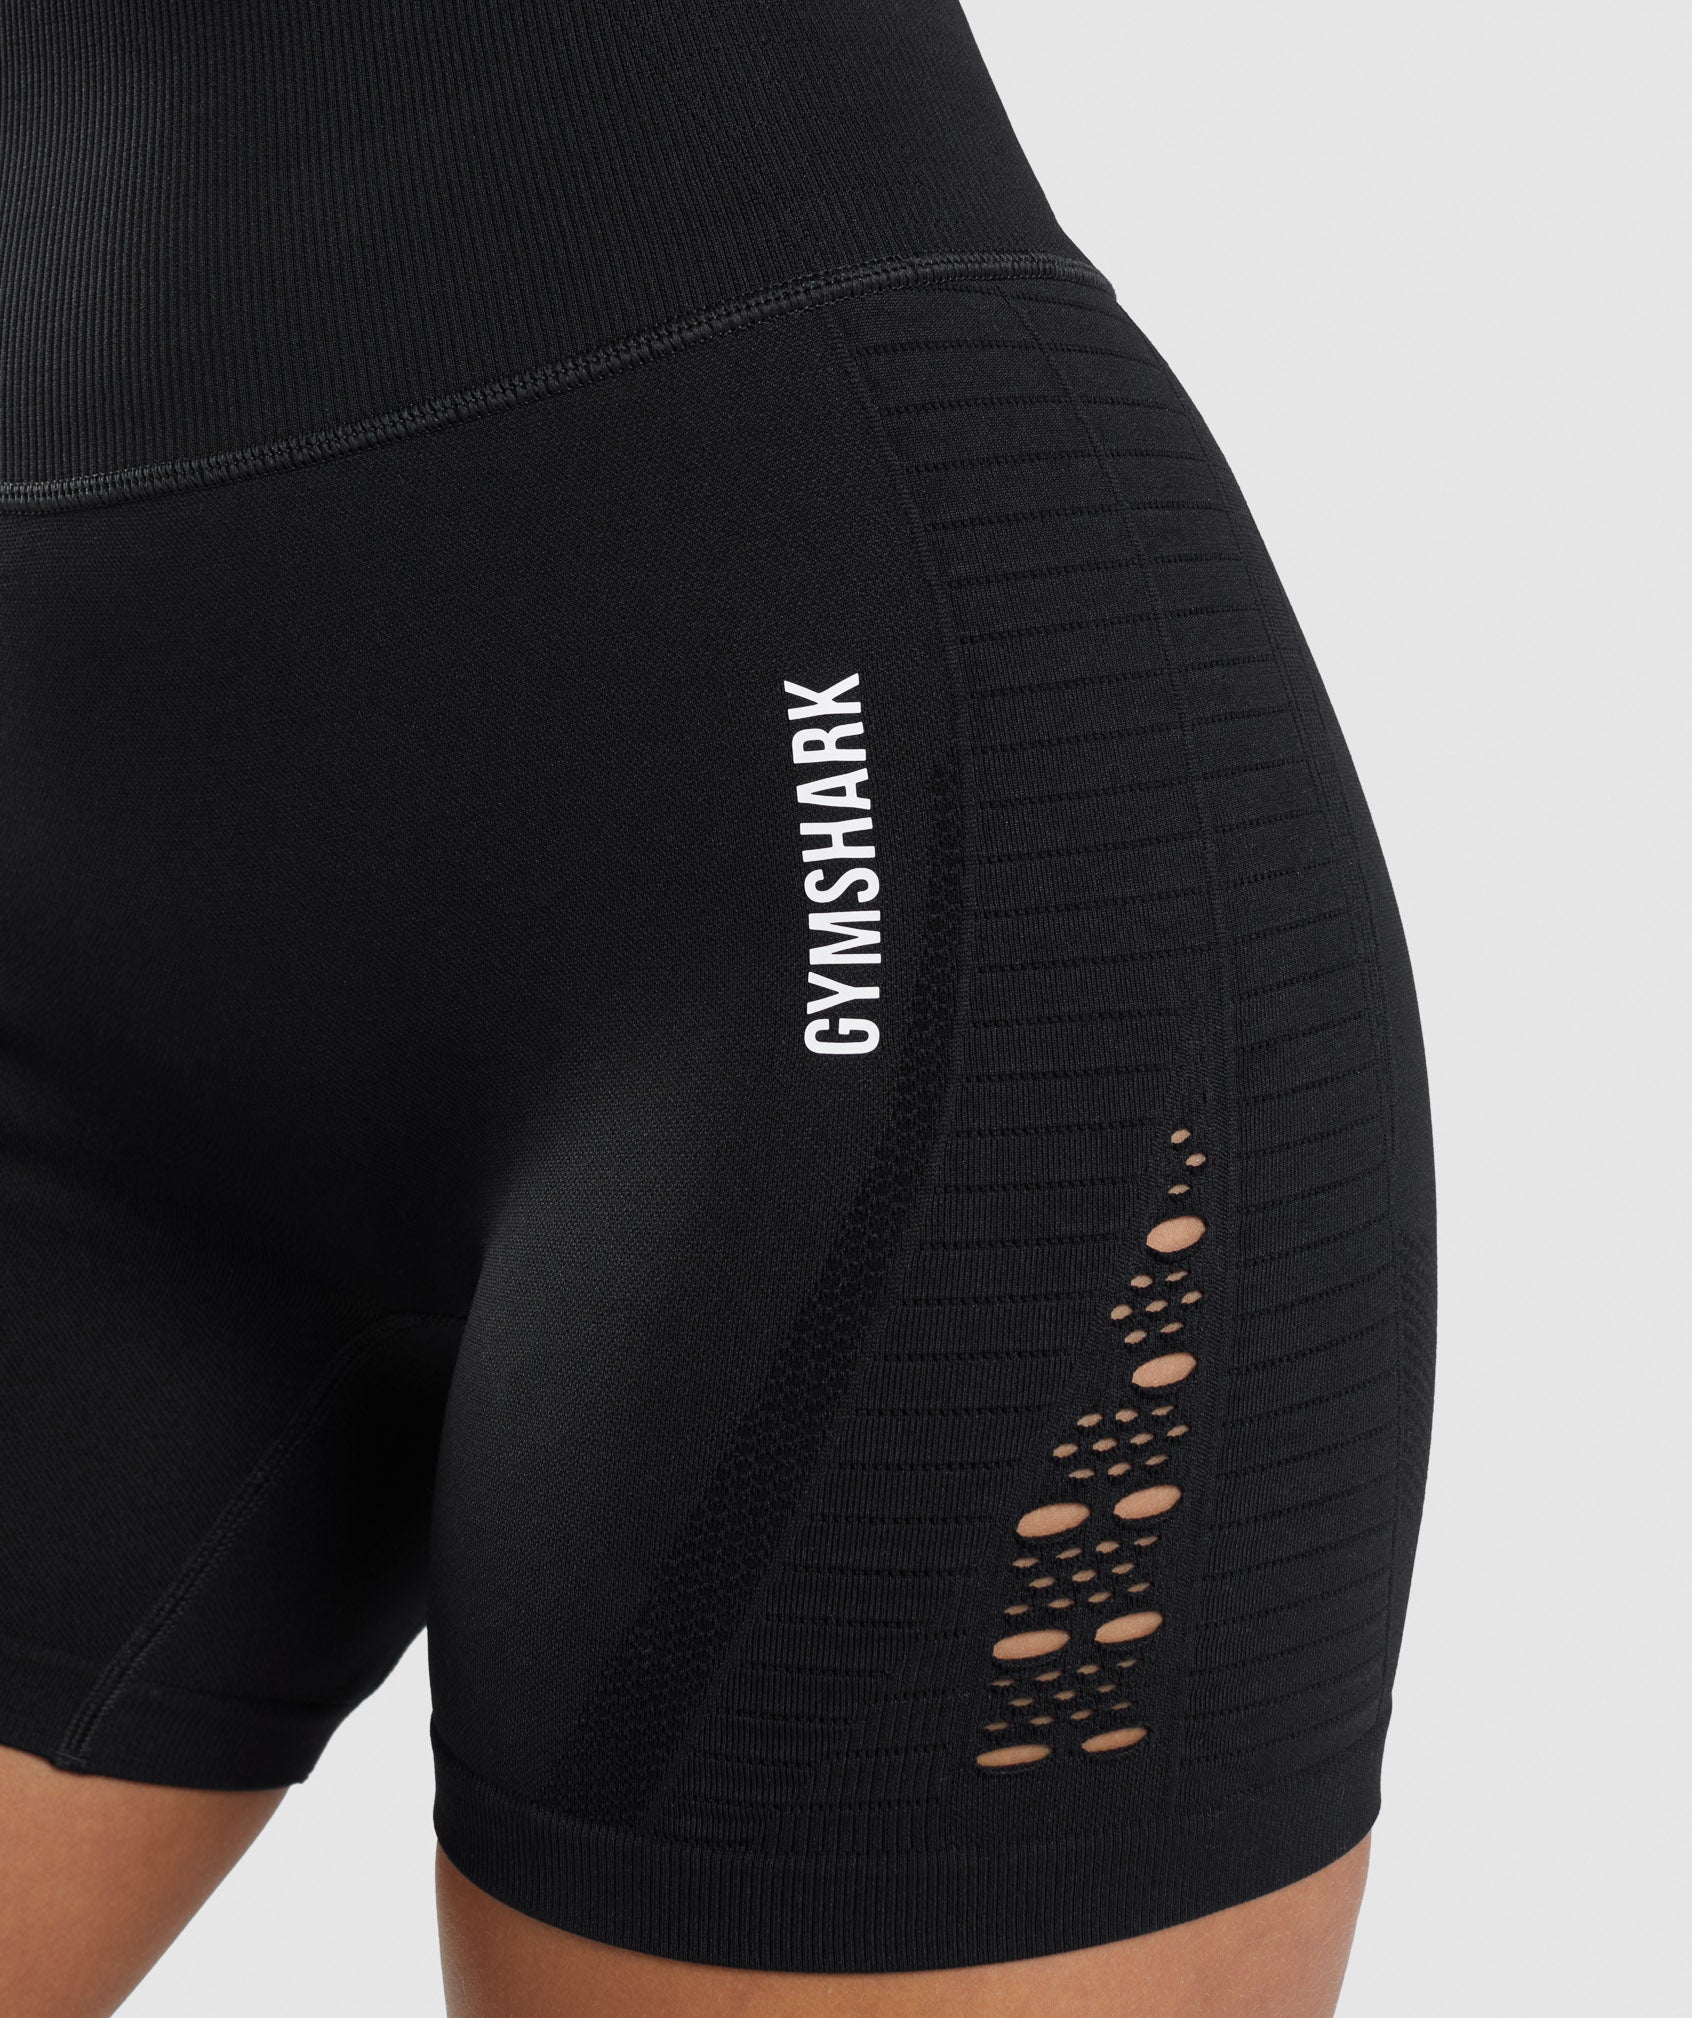 Energy Seamless Shorts in Black - view 6